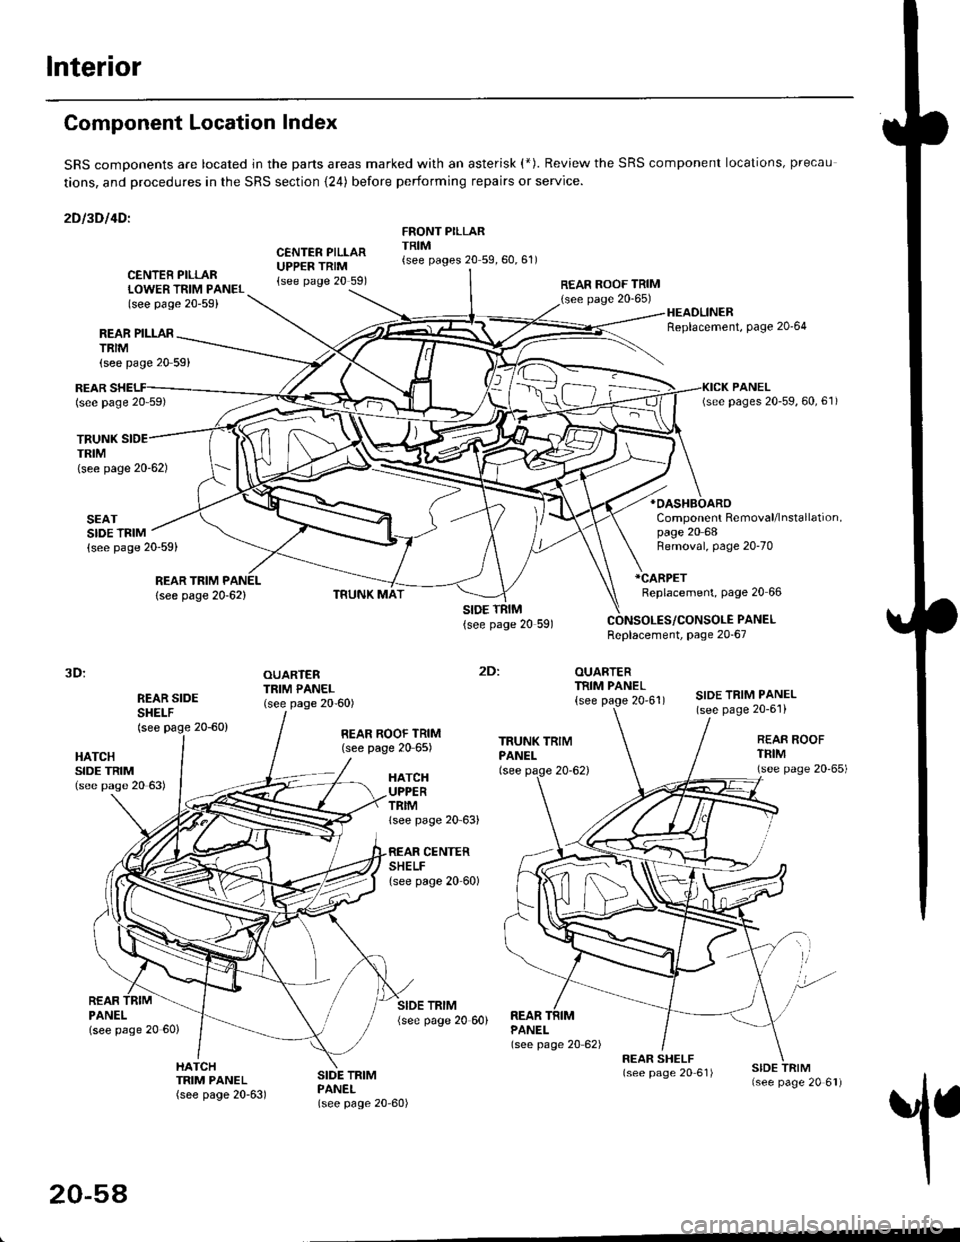 HONDA CIVIC 1999 6.G Workshop Manual Interior
Component Location Index
SRS comDonents are located jn the parts areas marked with an asterisk (*). Review the SRS component locations, precau
tions, and procedures in the SRS section {24) be